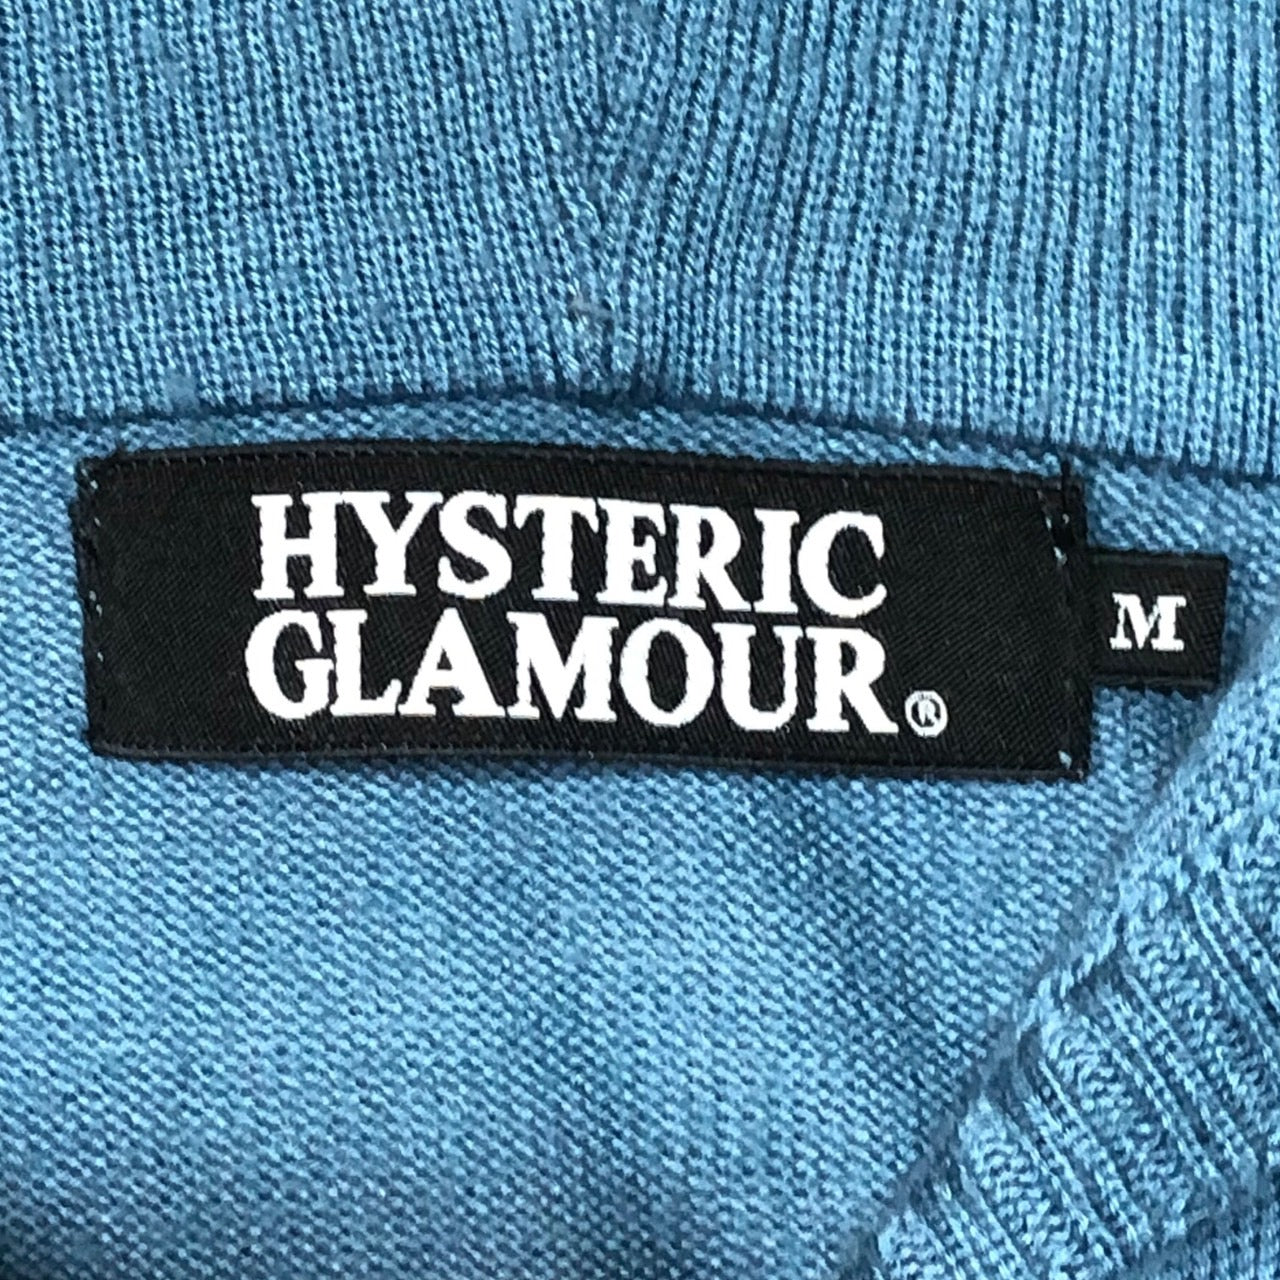 HYSTERIC GLAMOUR(ヒステリックグラマー) 